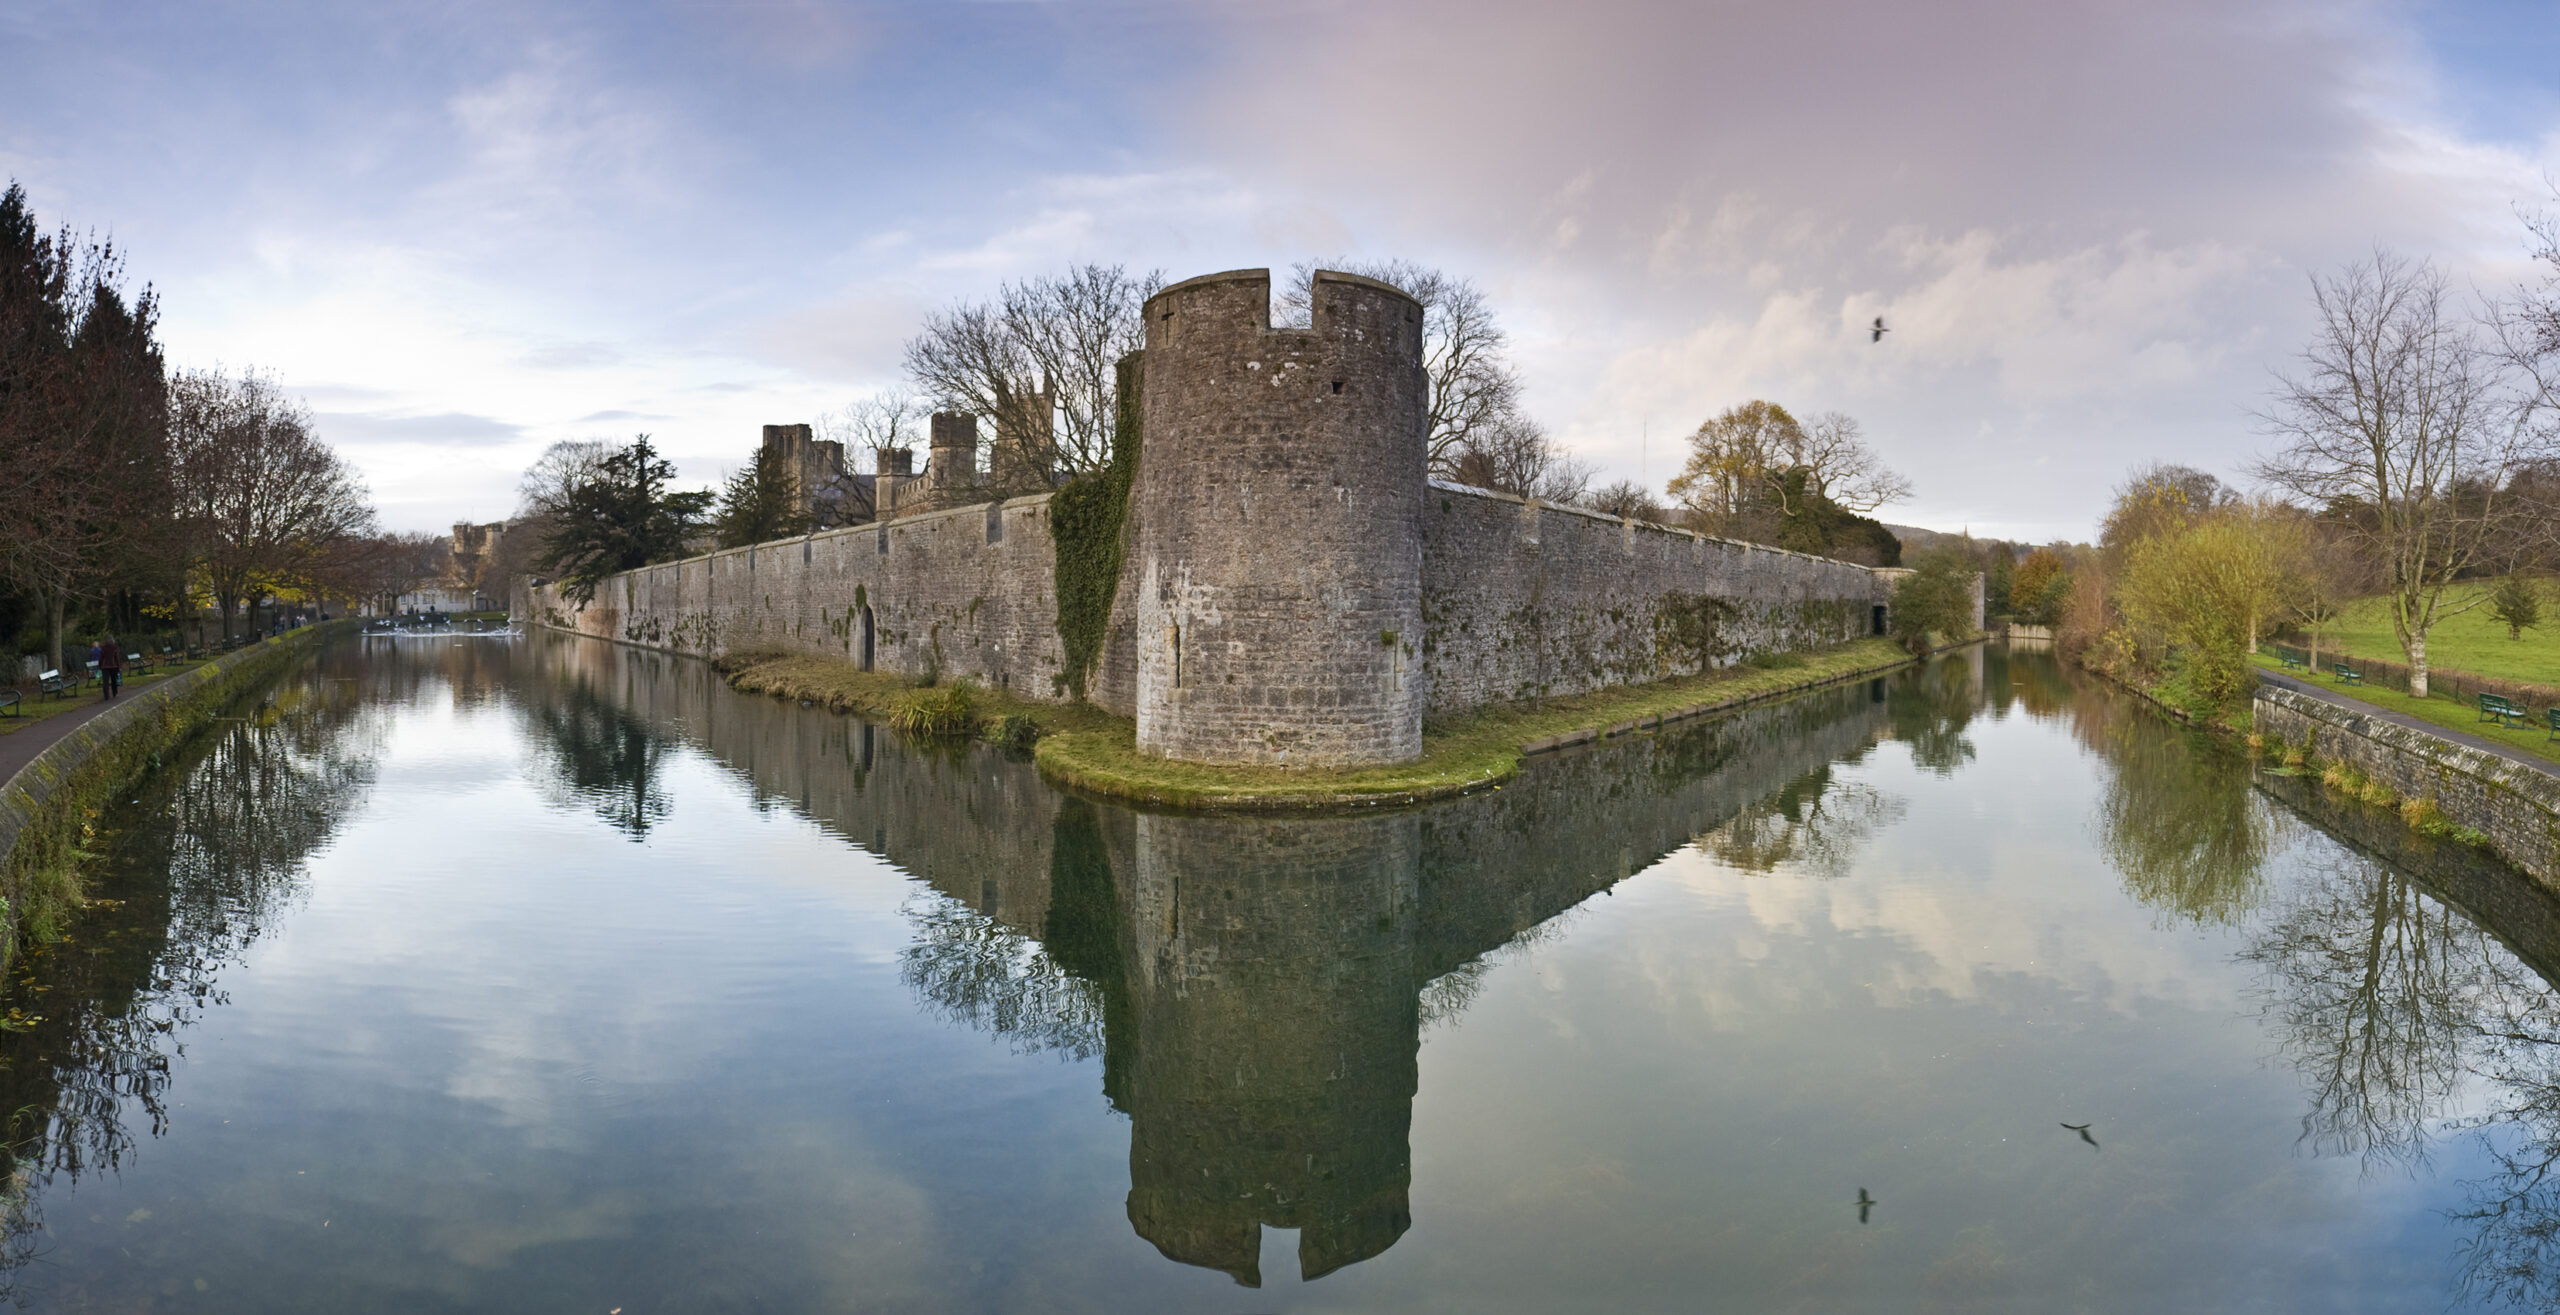 Still waters of a wide moat reflecting the historic stone walls and battlements of the Bishop's Palace at Wells, Somerset, UK.